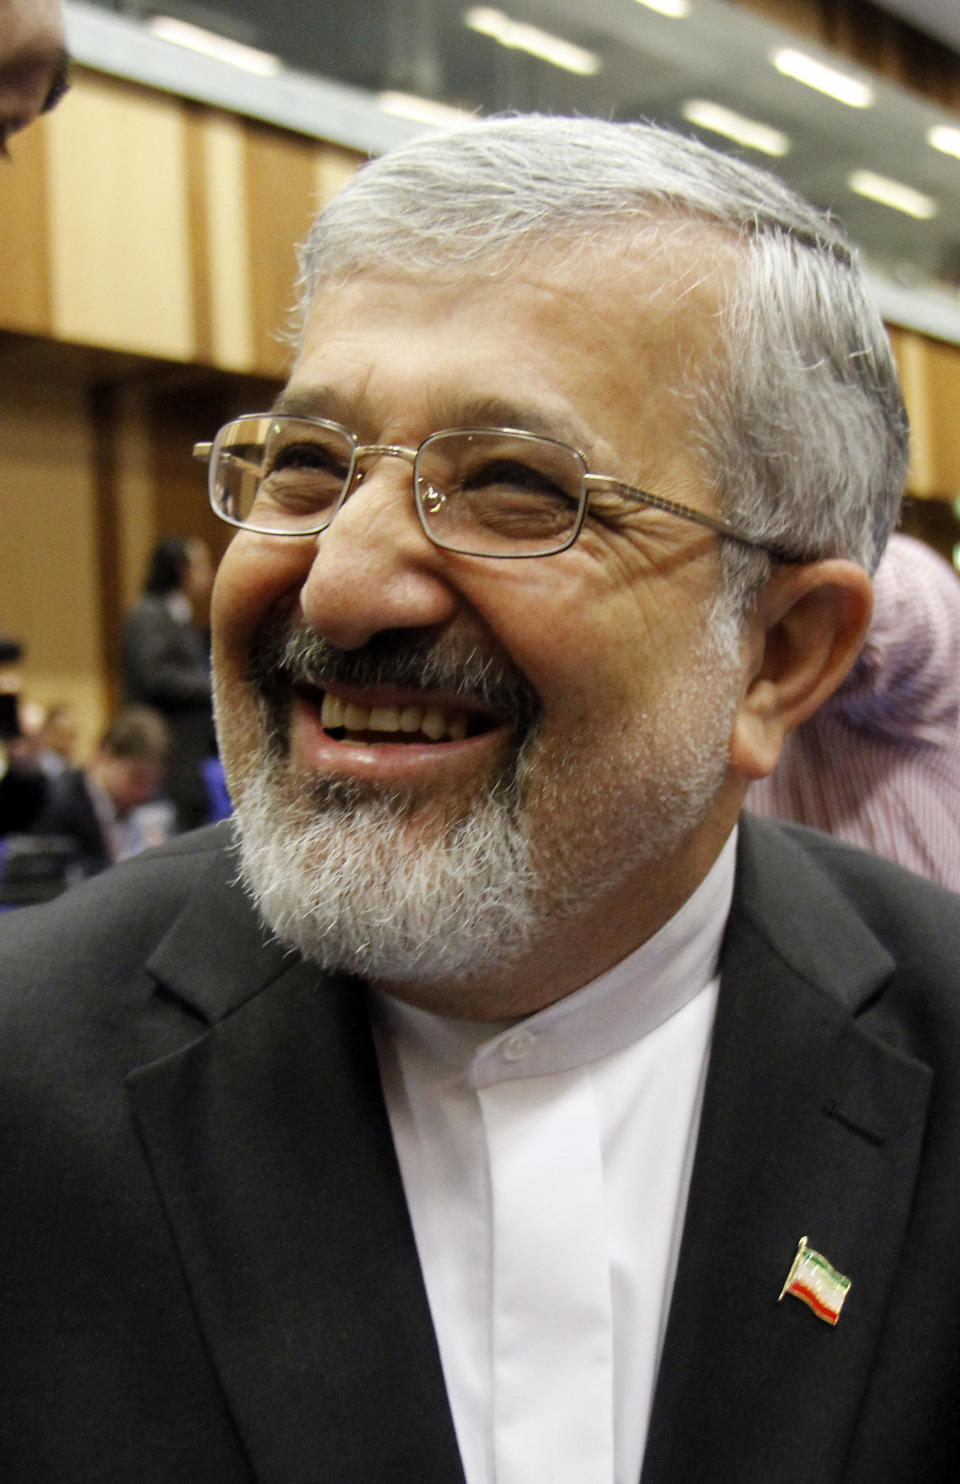 Iran's ambassador to the International Atomic Energy Agency, IAEA, Ali Asghar Soltanieh laughs prior to the start of the IAEA board of governors meeting at the International Center, in Vienna, Austria, on Thursday, March 8, 2012. (AP Photo/Ronald Zak)